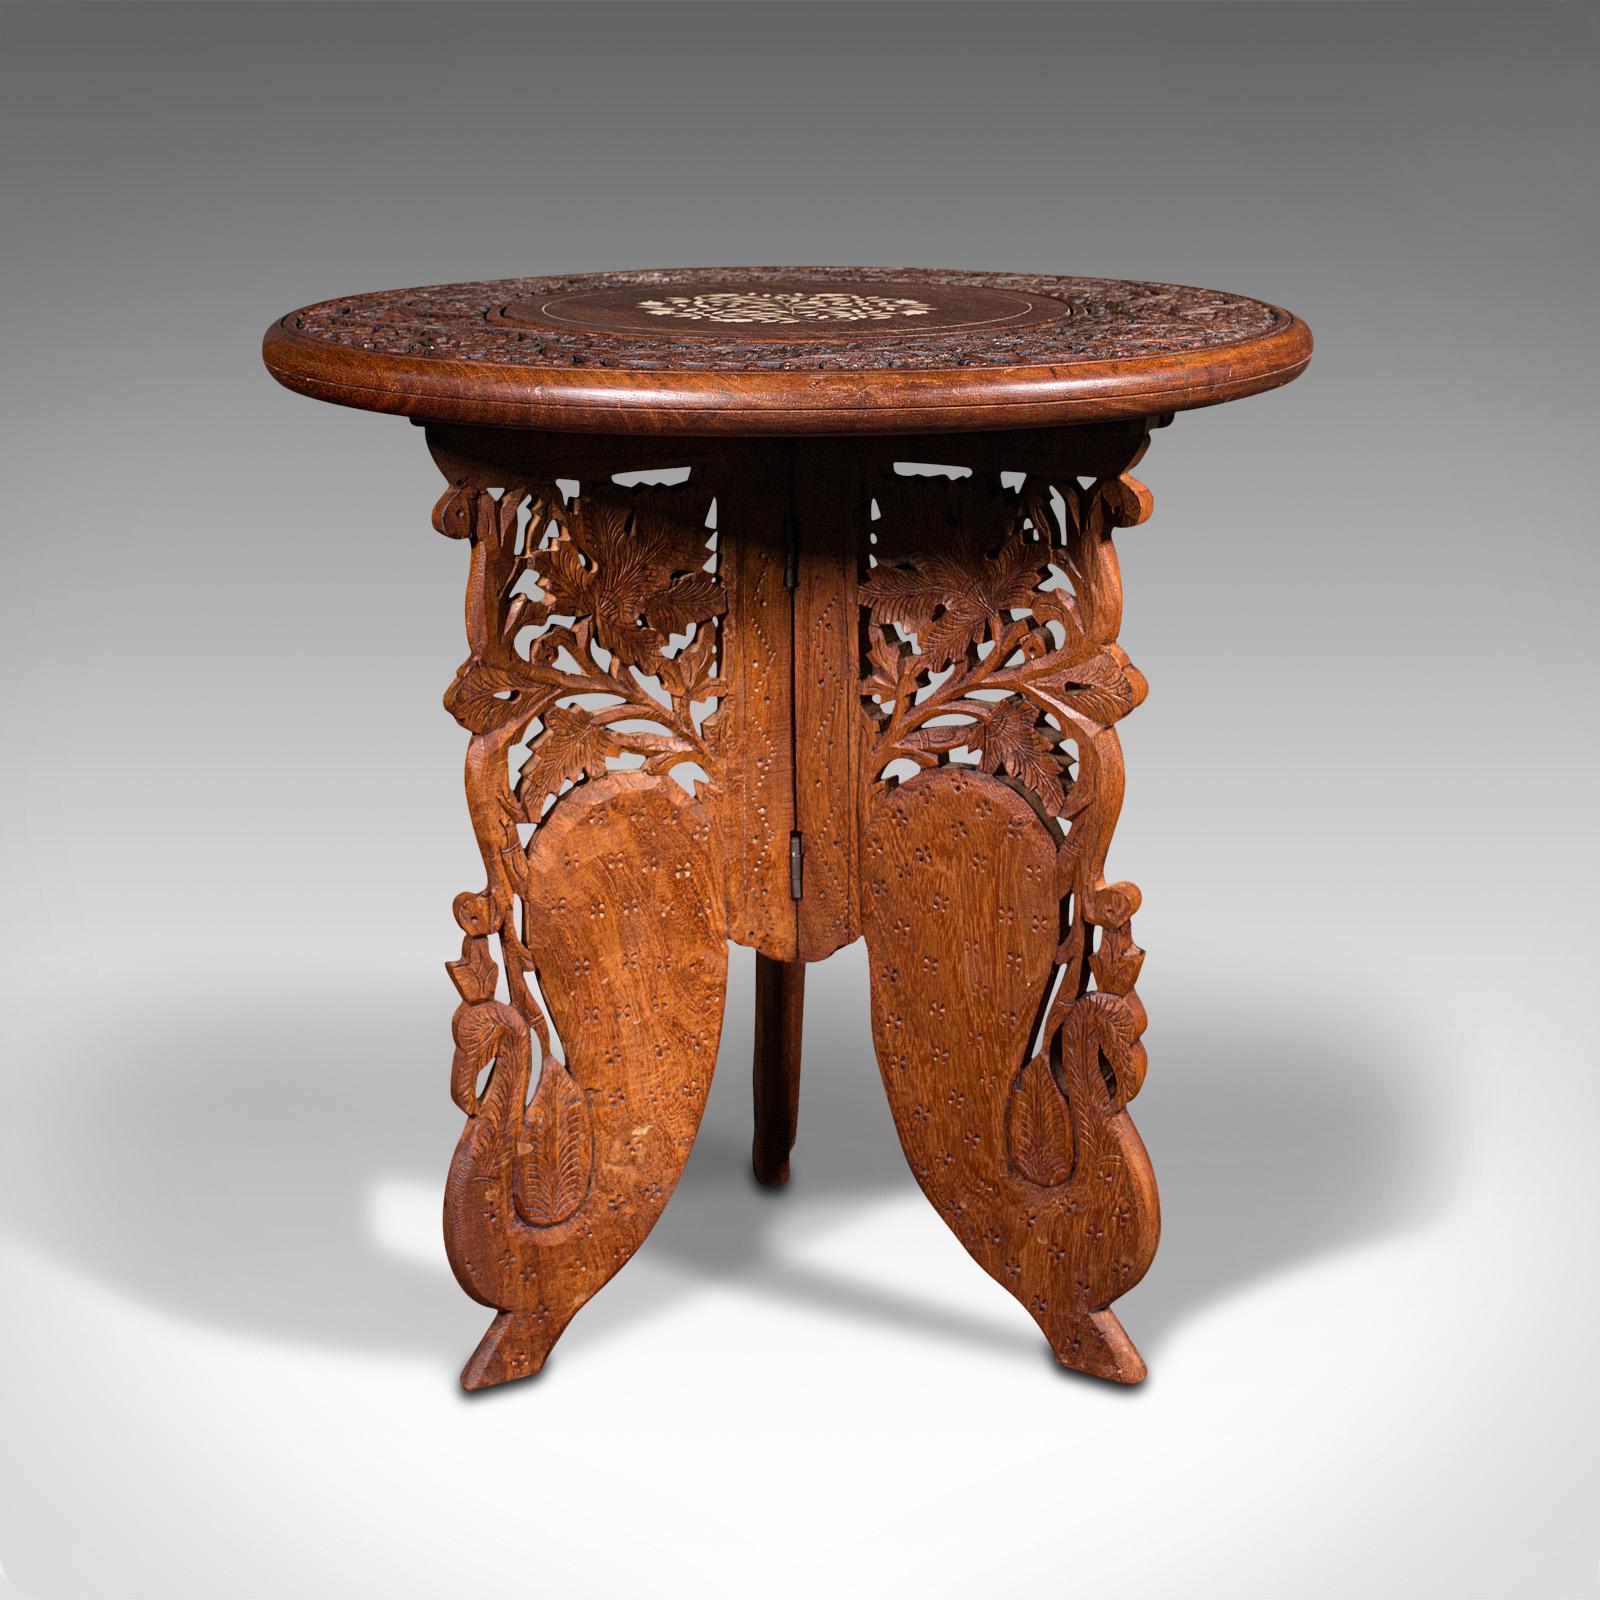 This is a vintage circular side table. An Anglo-Indian, teak lamp or wine table with Colonial Art Deco taste, dating to the mid 20th century, circa 1940.

Graced with distinctive exotic taste
Displays a desirable aged patina and in good